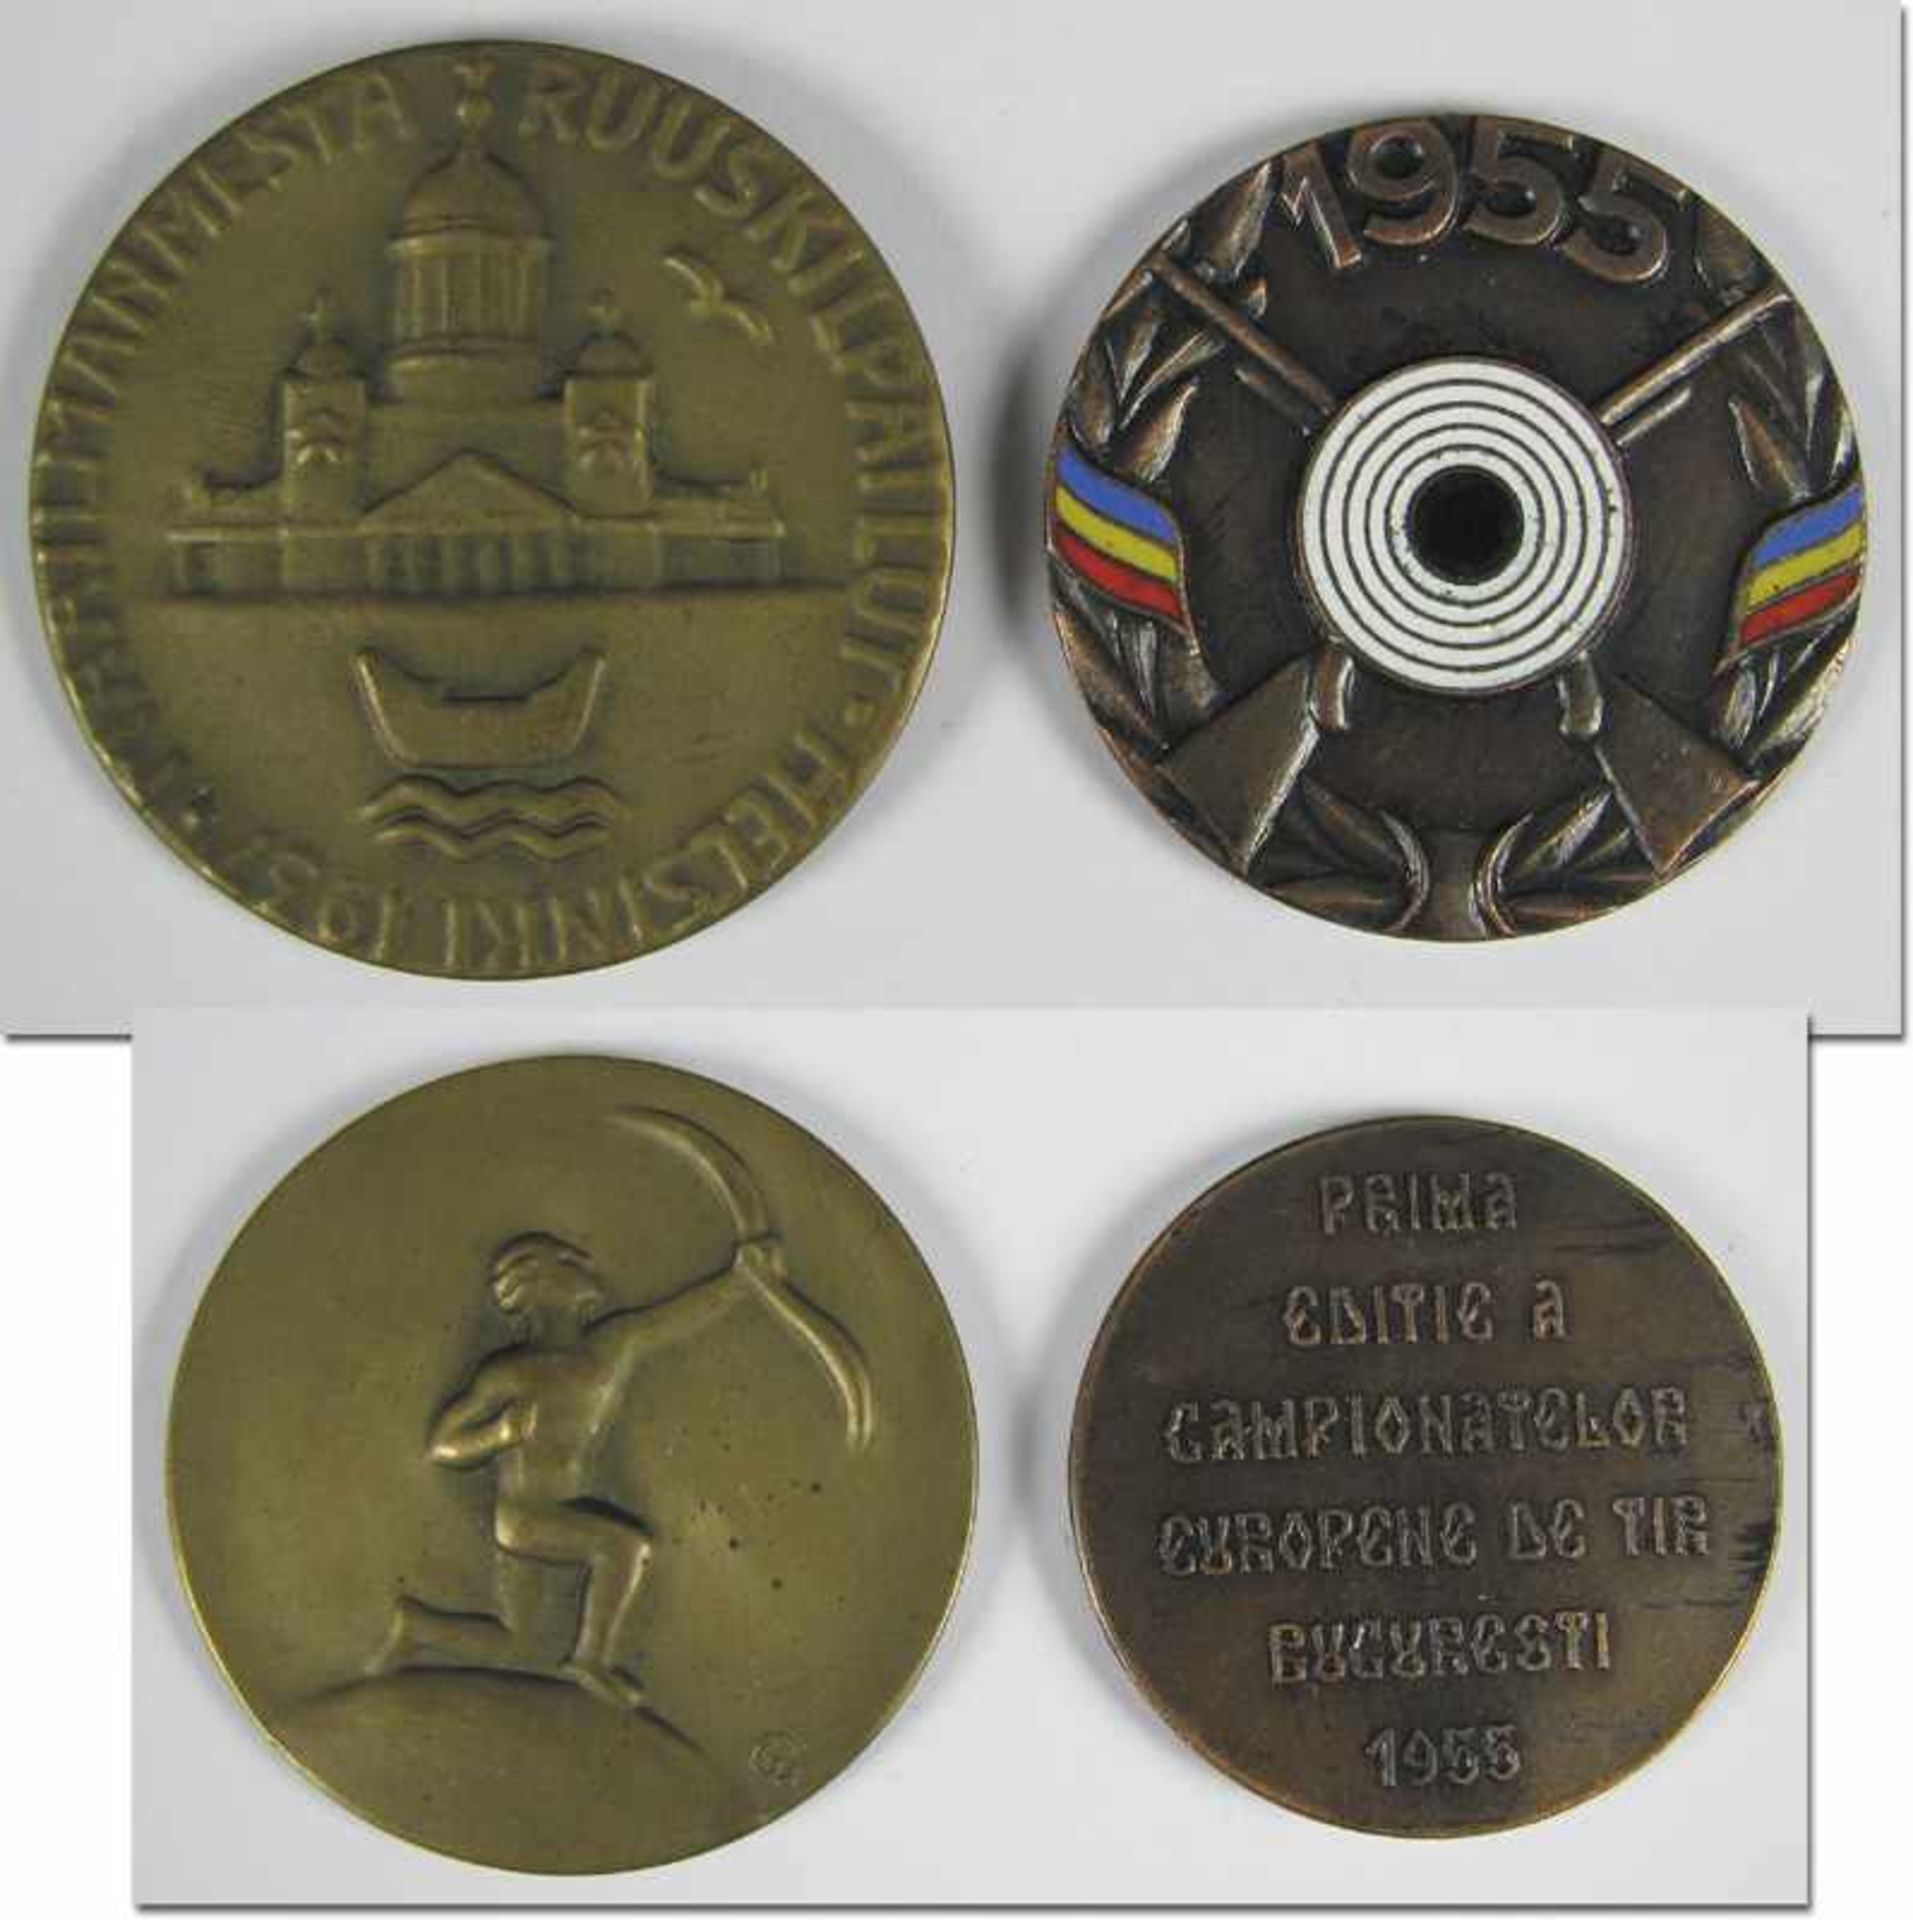 Shooting World Championships 1937 + 1955 Medals - Participation medals from the shooting World